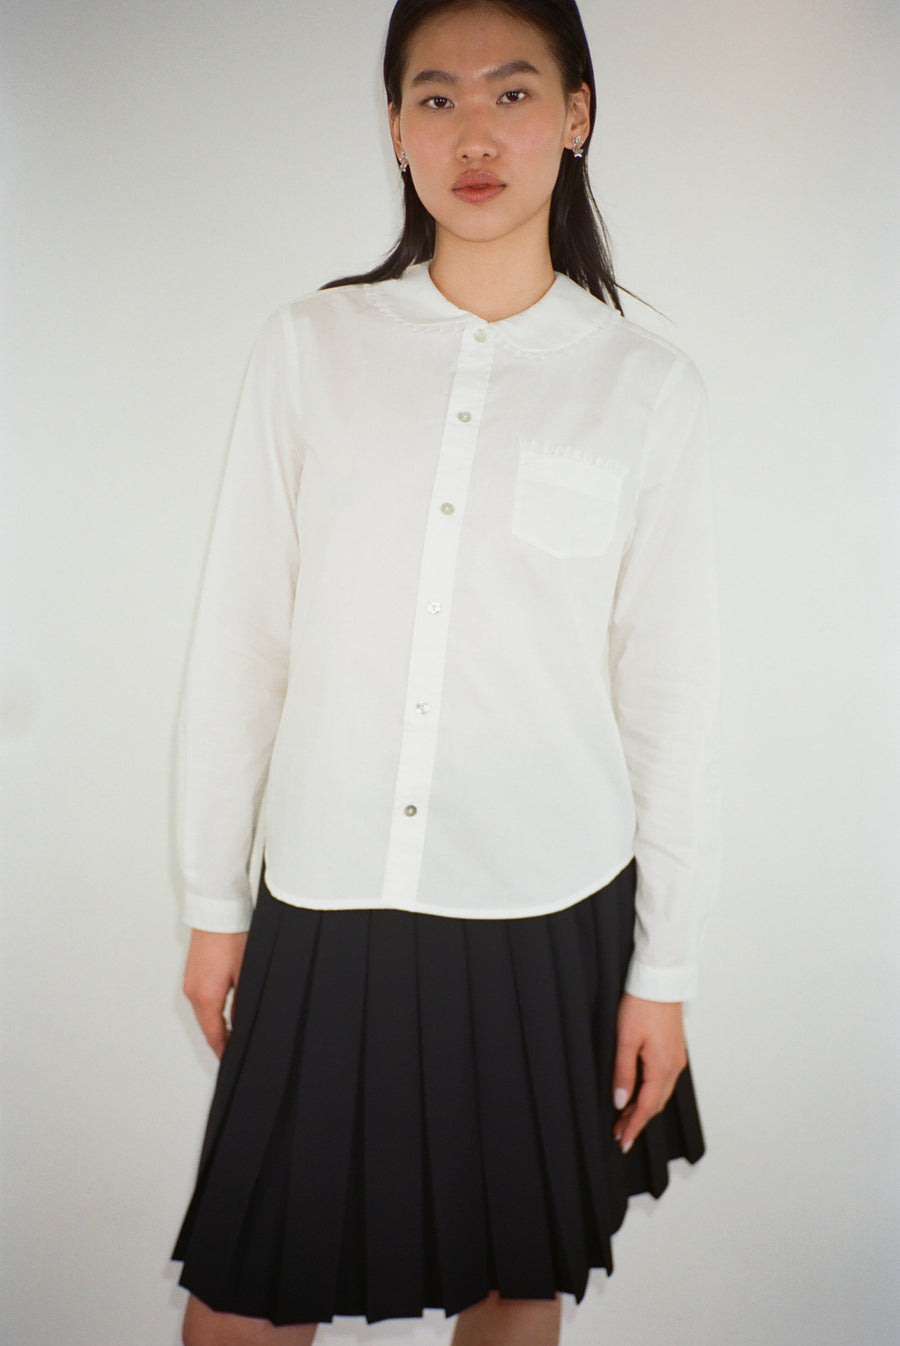 Long sleeve button up collared shirt with lace detail in white on model